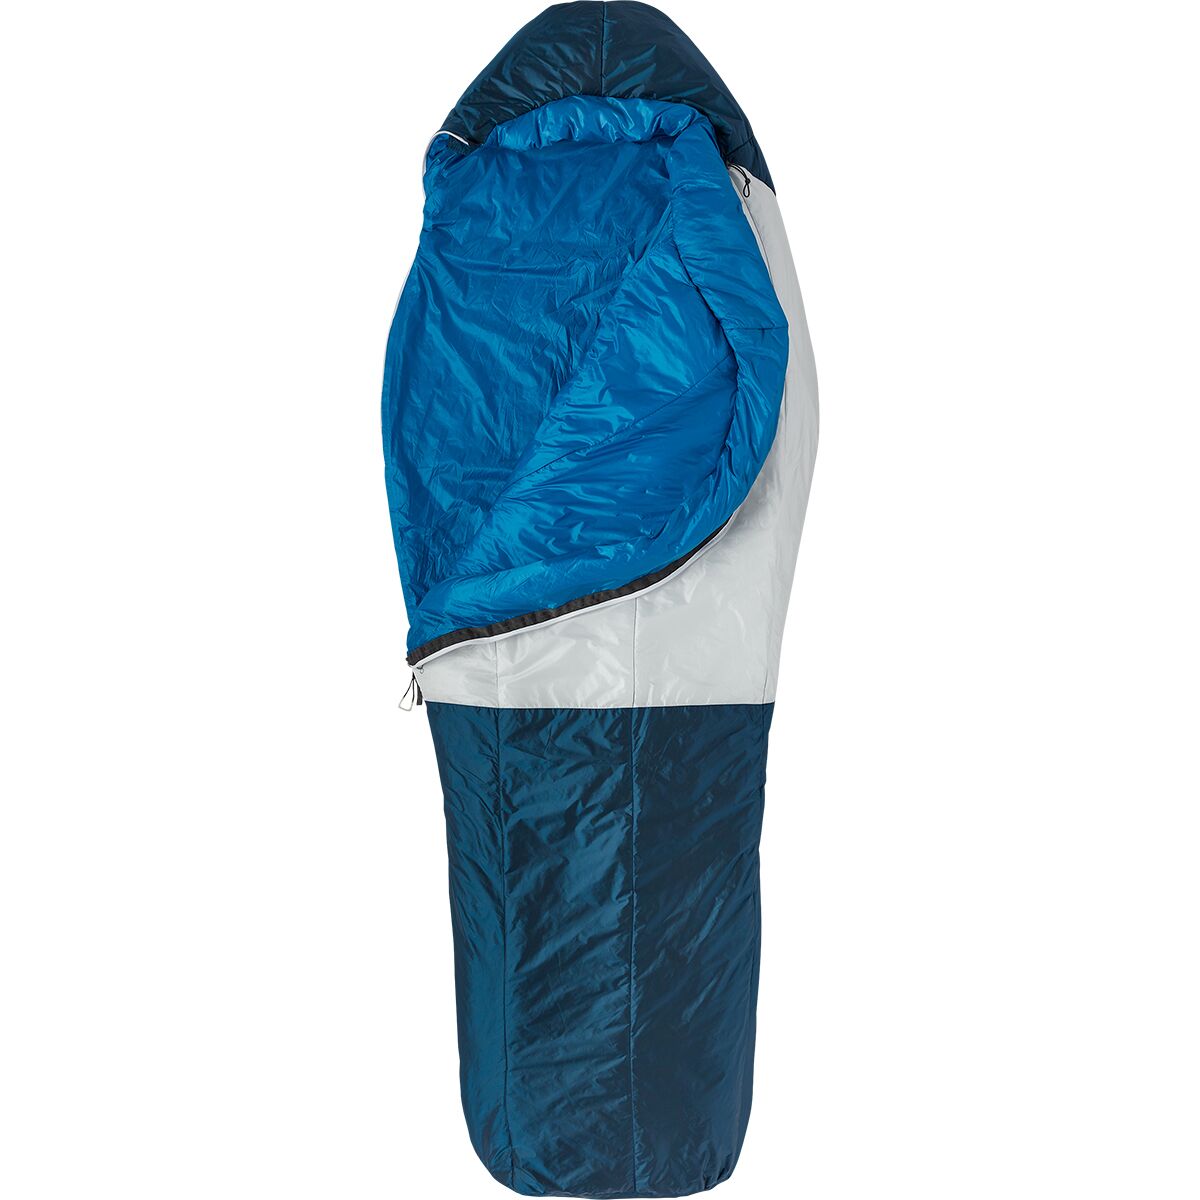 The North Face Cat's Meow Sleeping Bag: 20F Synthetic